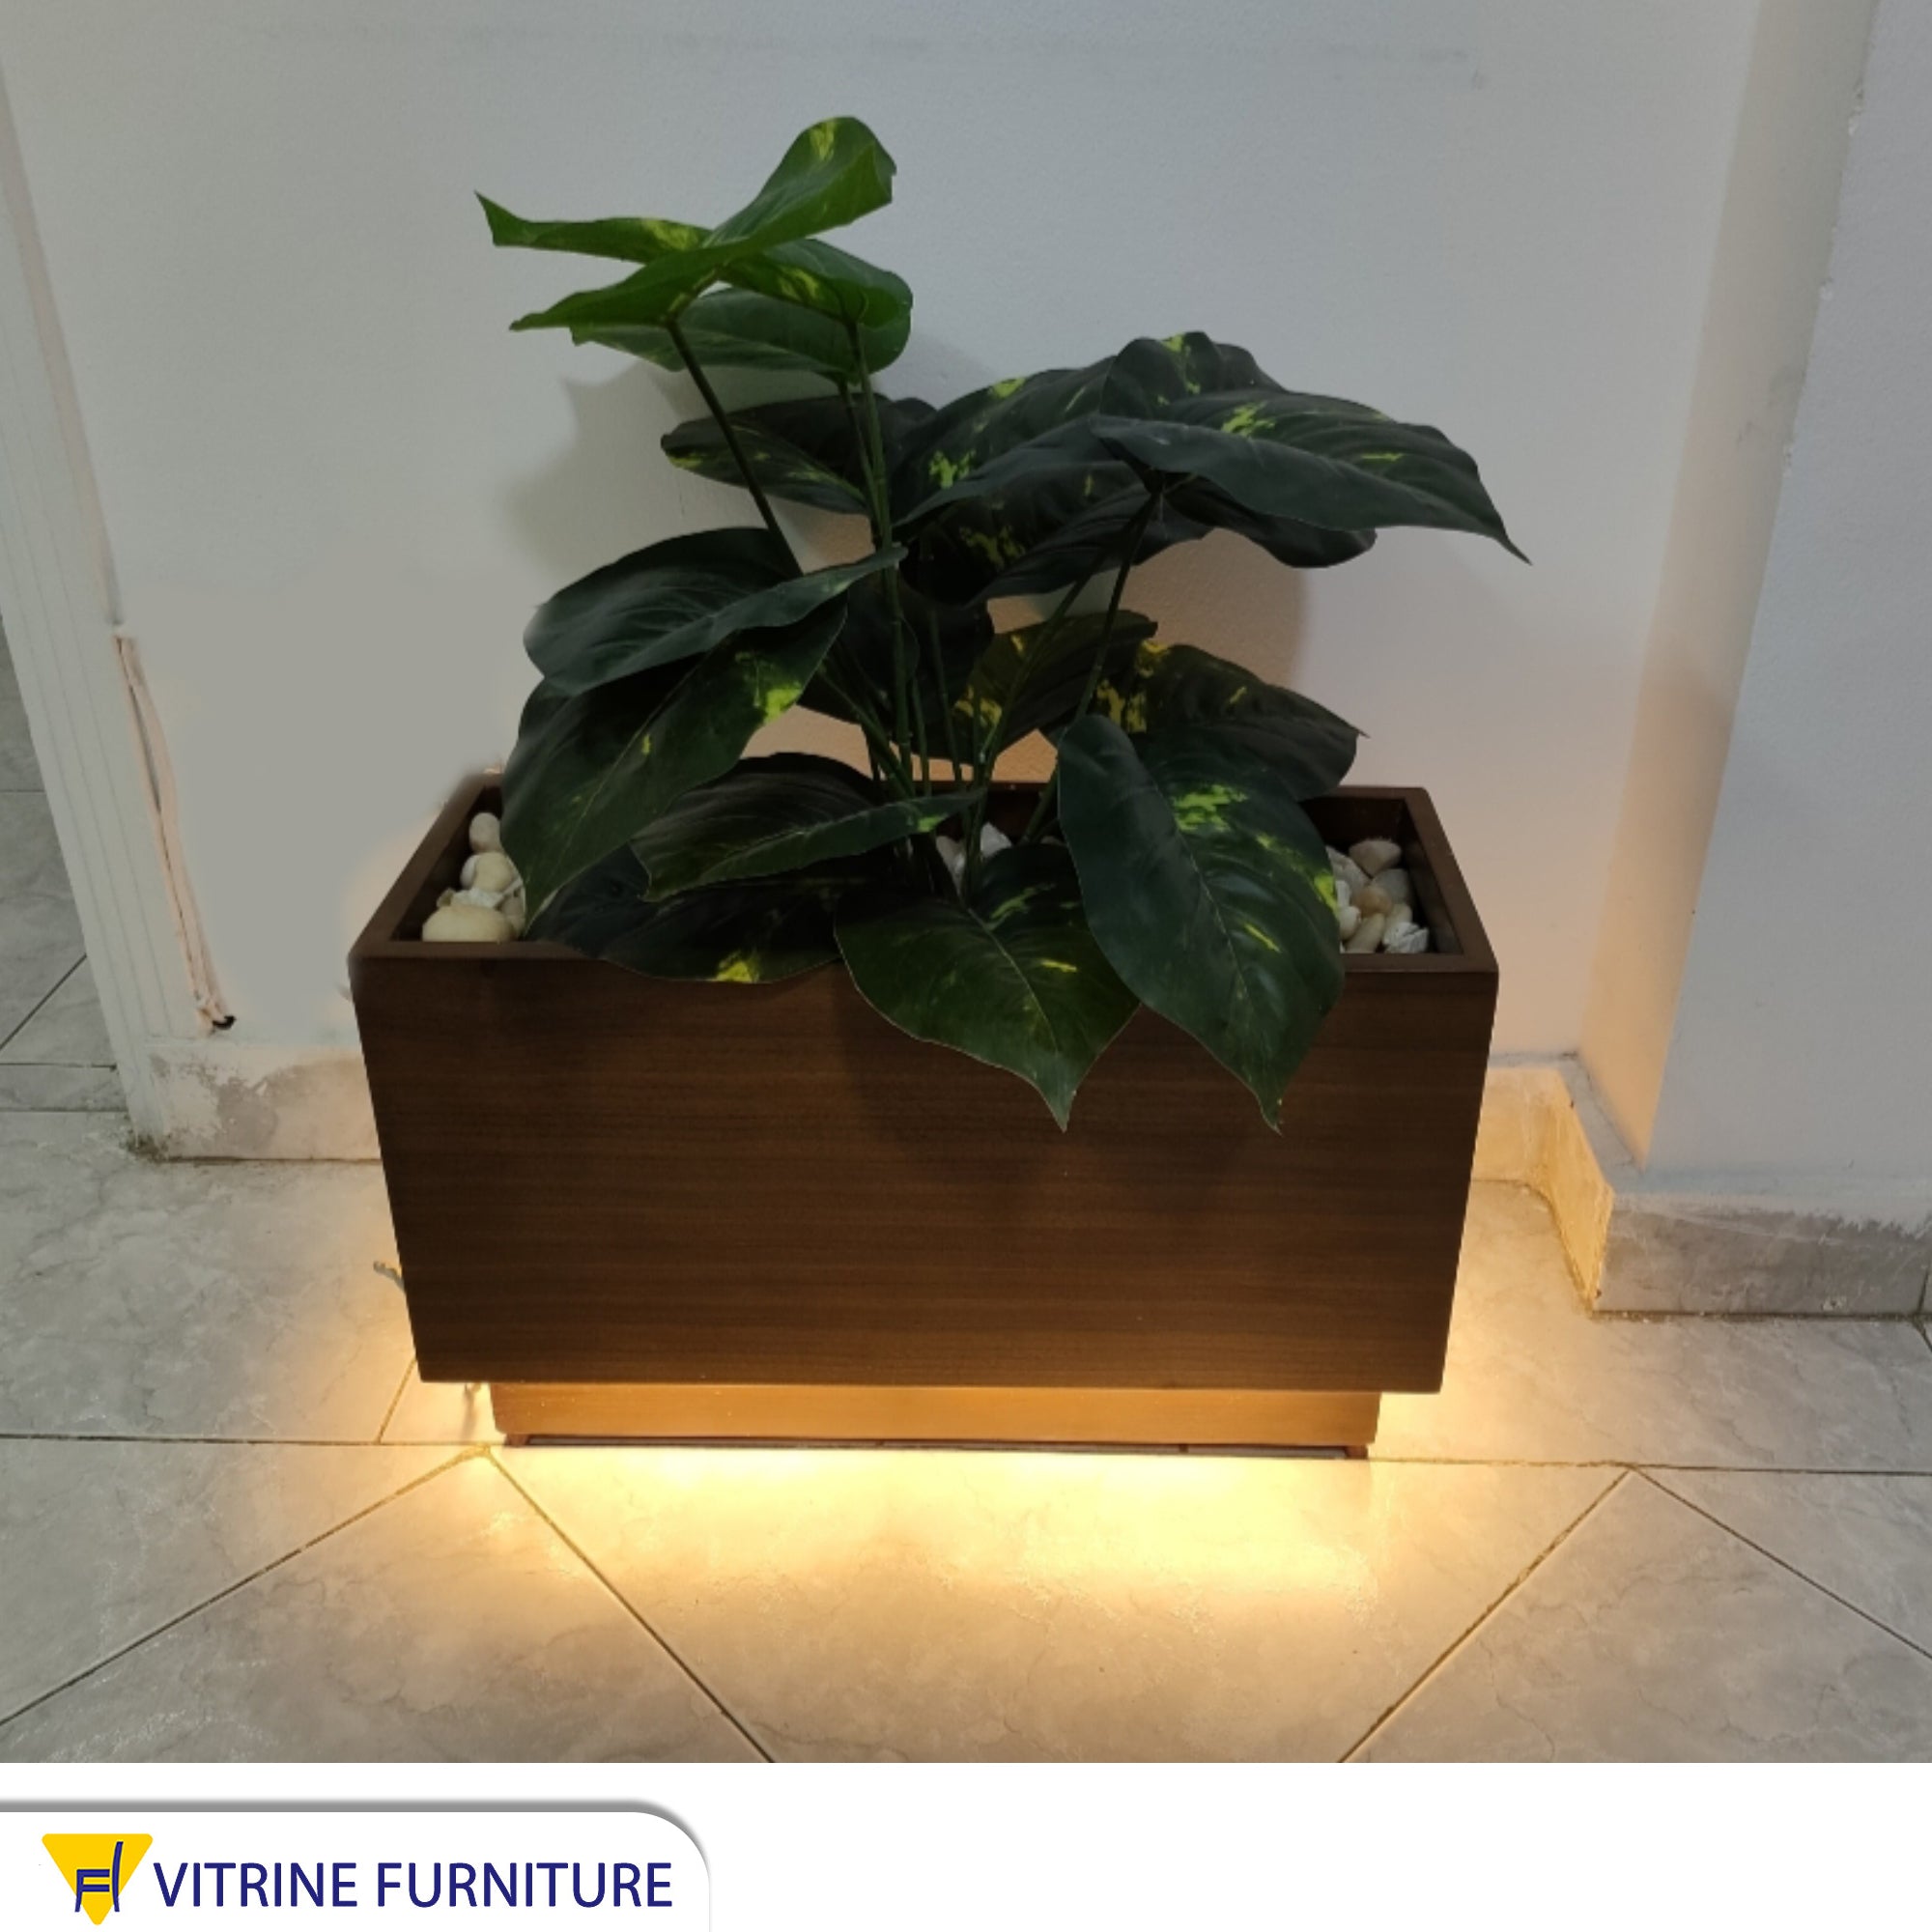 Brown artificial plant pot equipped with LED